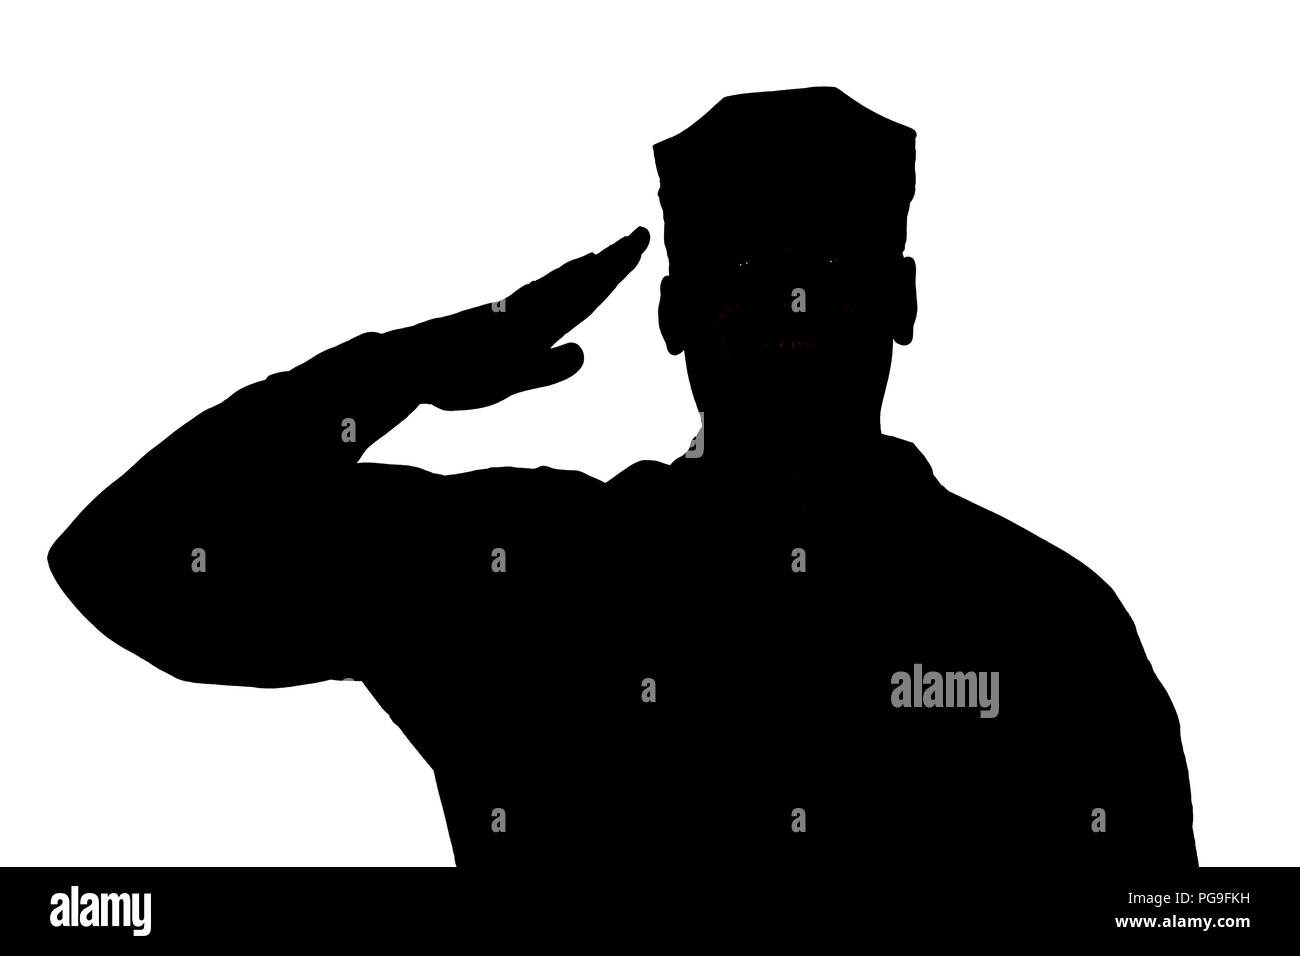 Saluting Soldier Silhouette On White Background Isolated Stock Photo